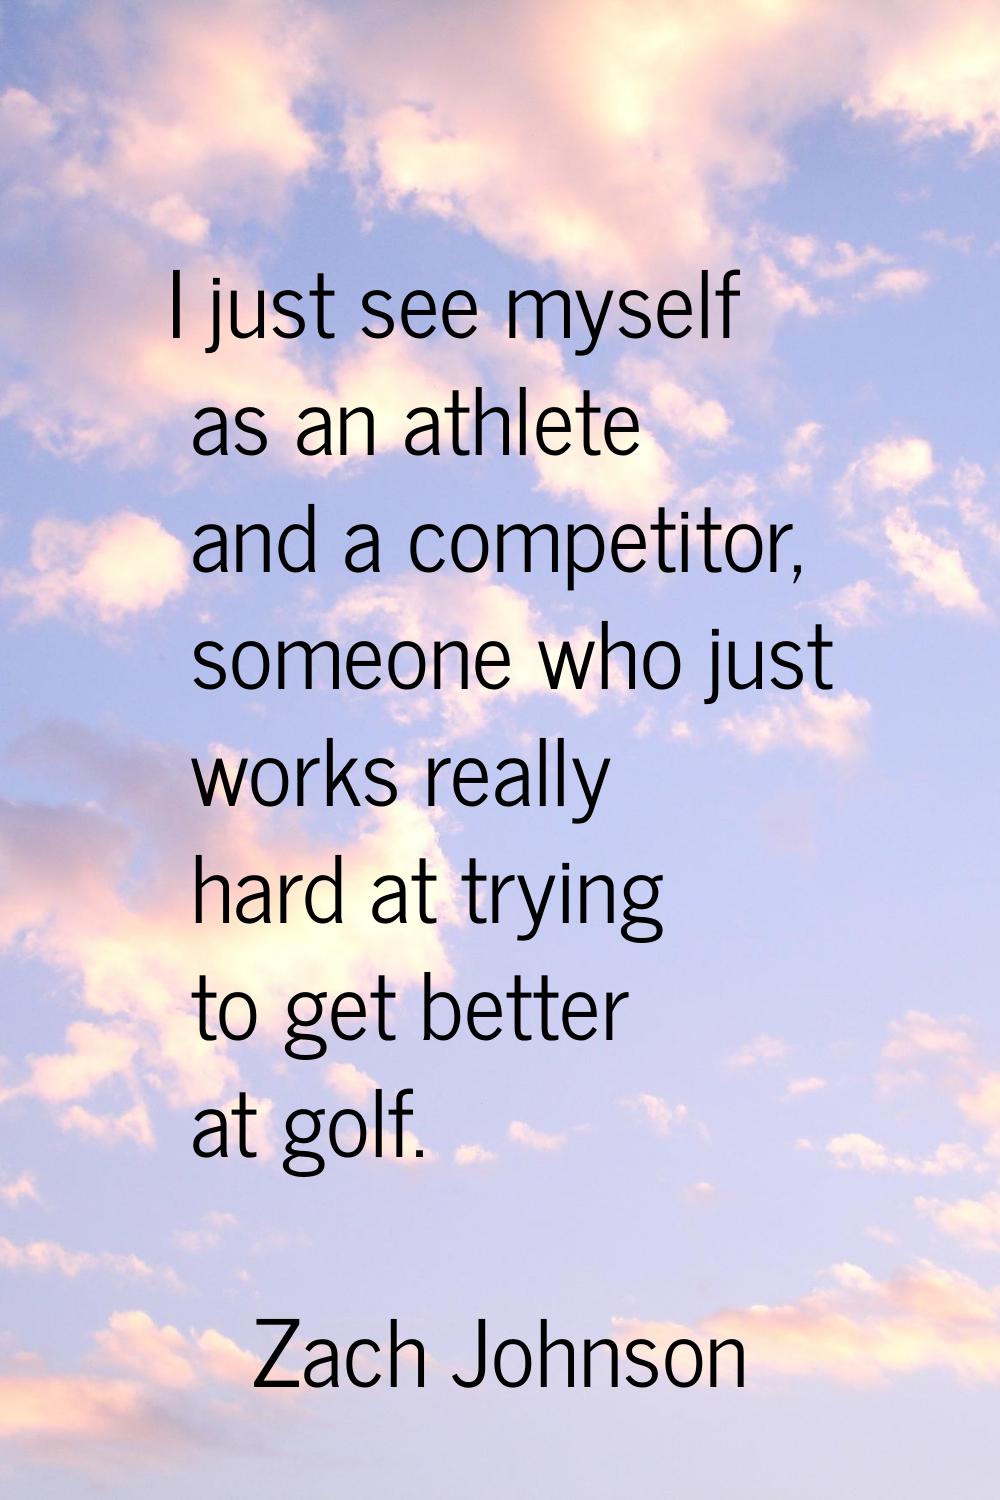 I just see myself as an athlete and a competitor, someone who just works really hard at trying to g